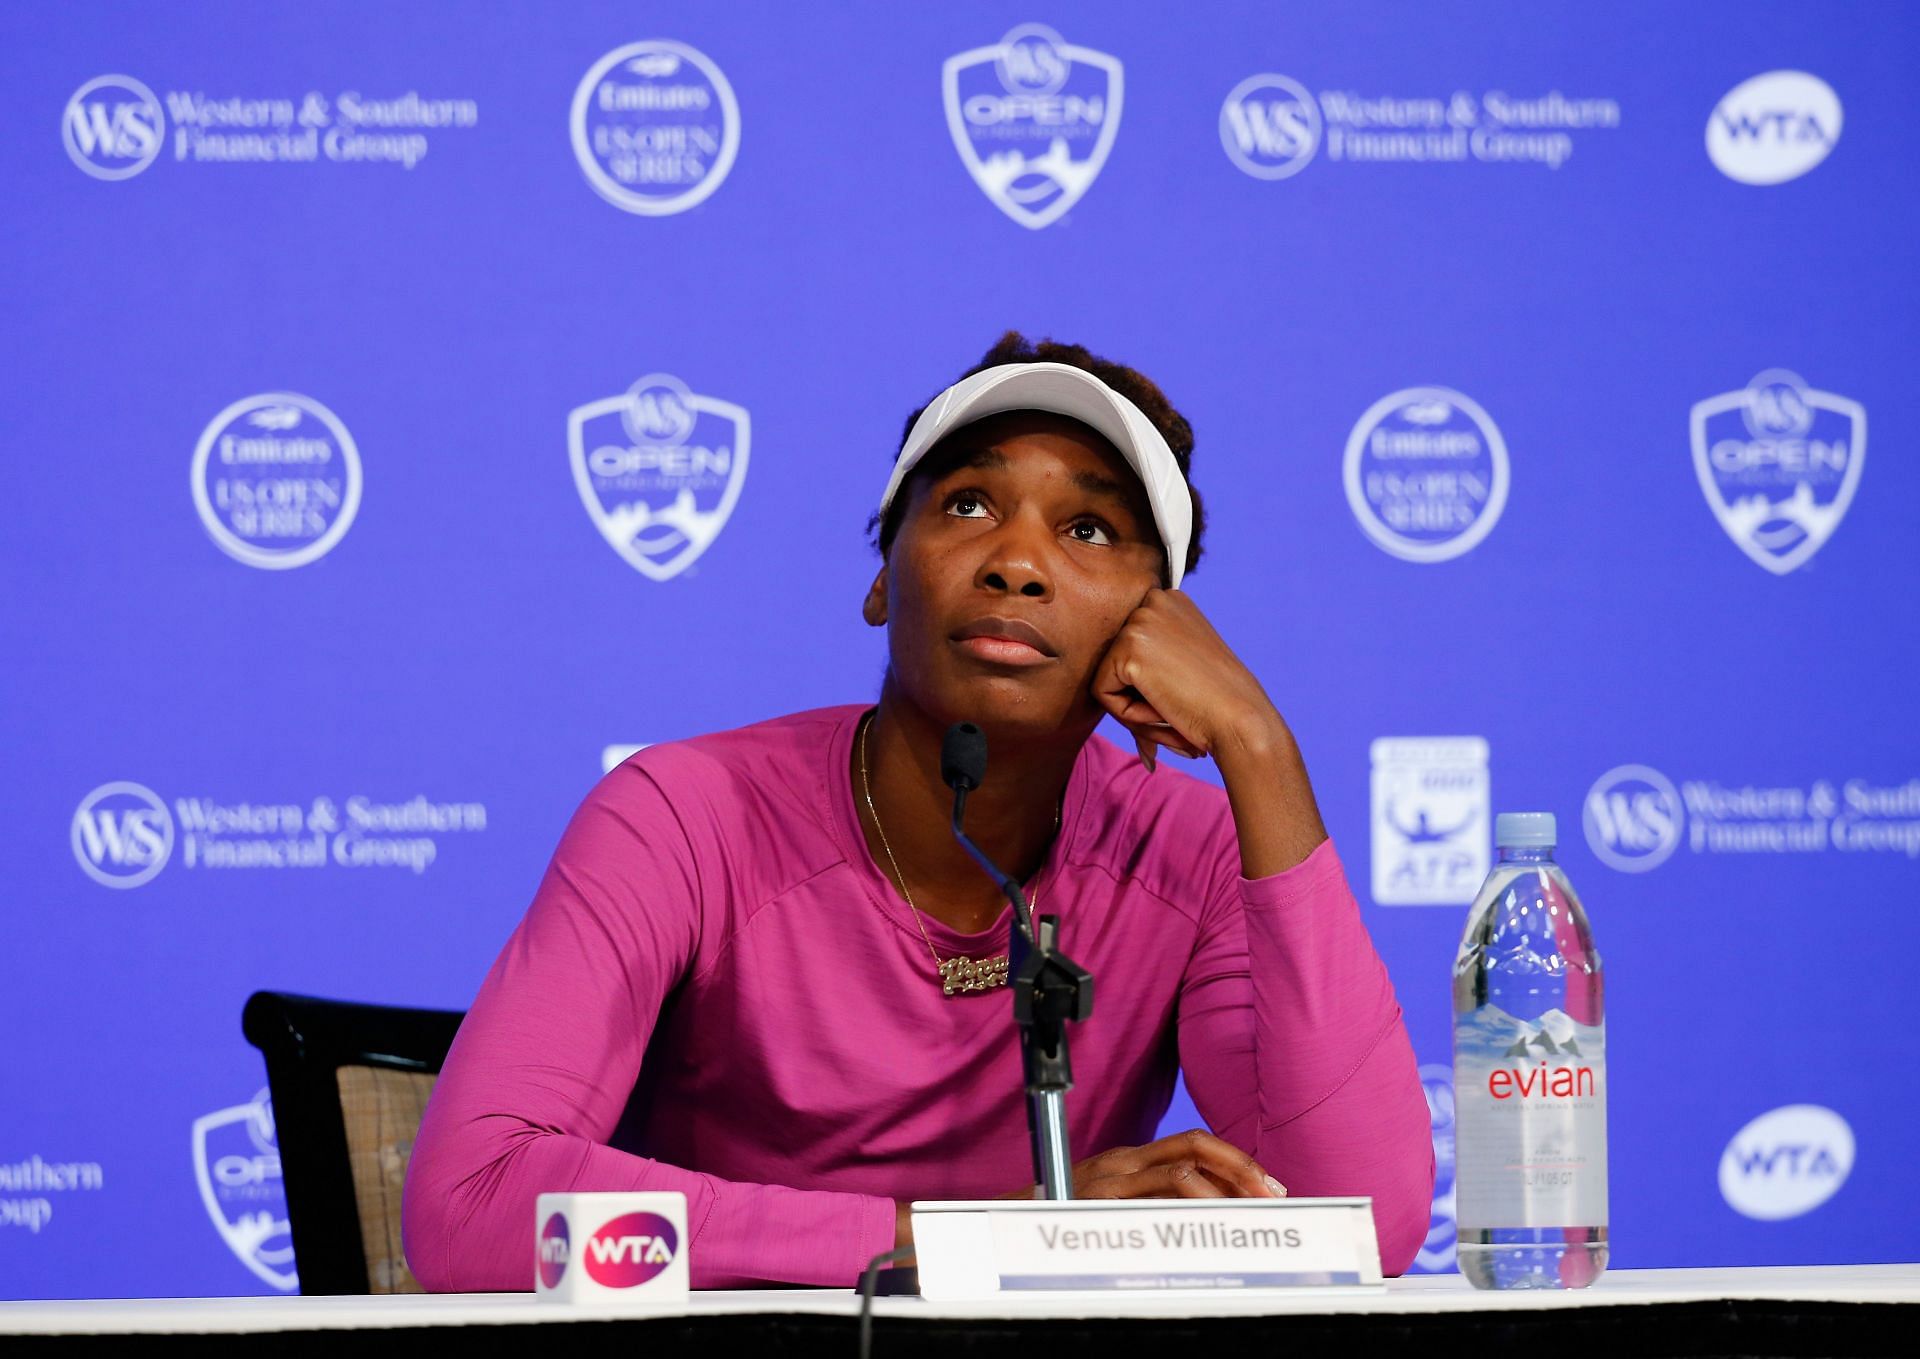 Venus Williams at the 2015 Western &amp; Southern Open - Day 4